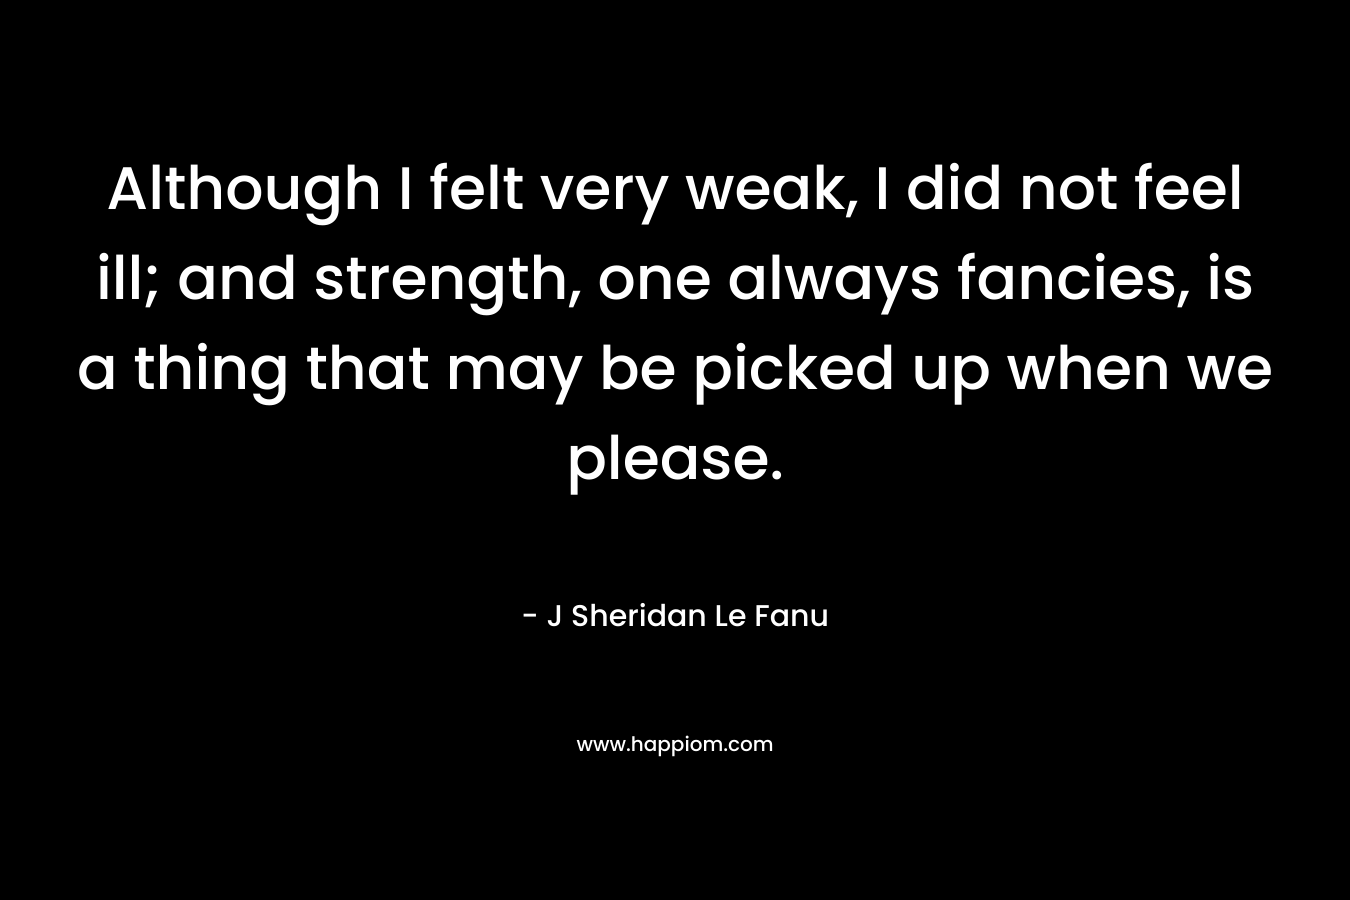 Although I felt very weak, I did not feel ill; and strength, one always fancies, is a thing that may be picked up when we please.